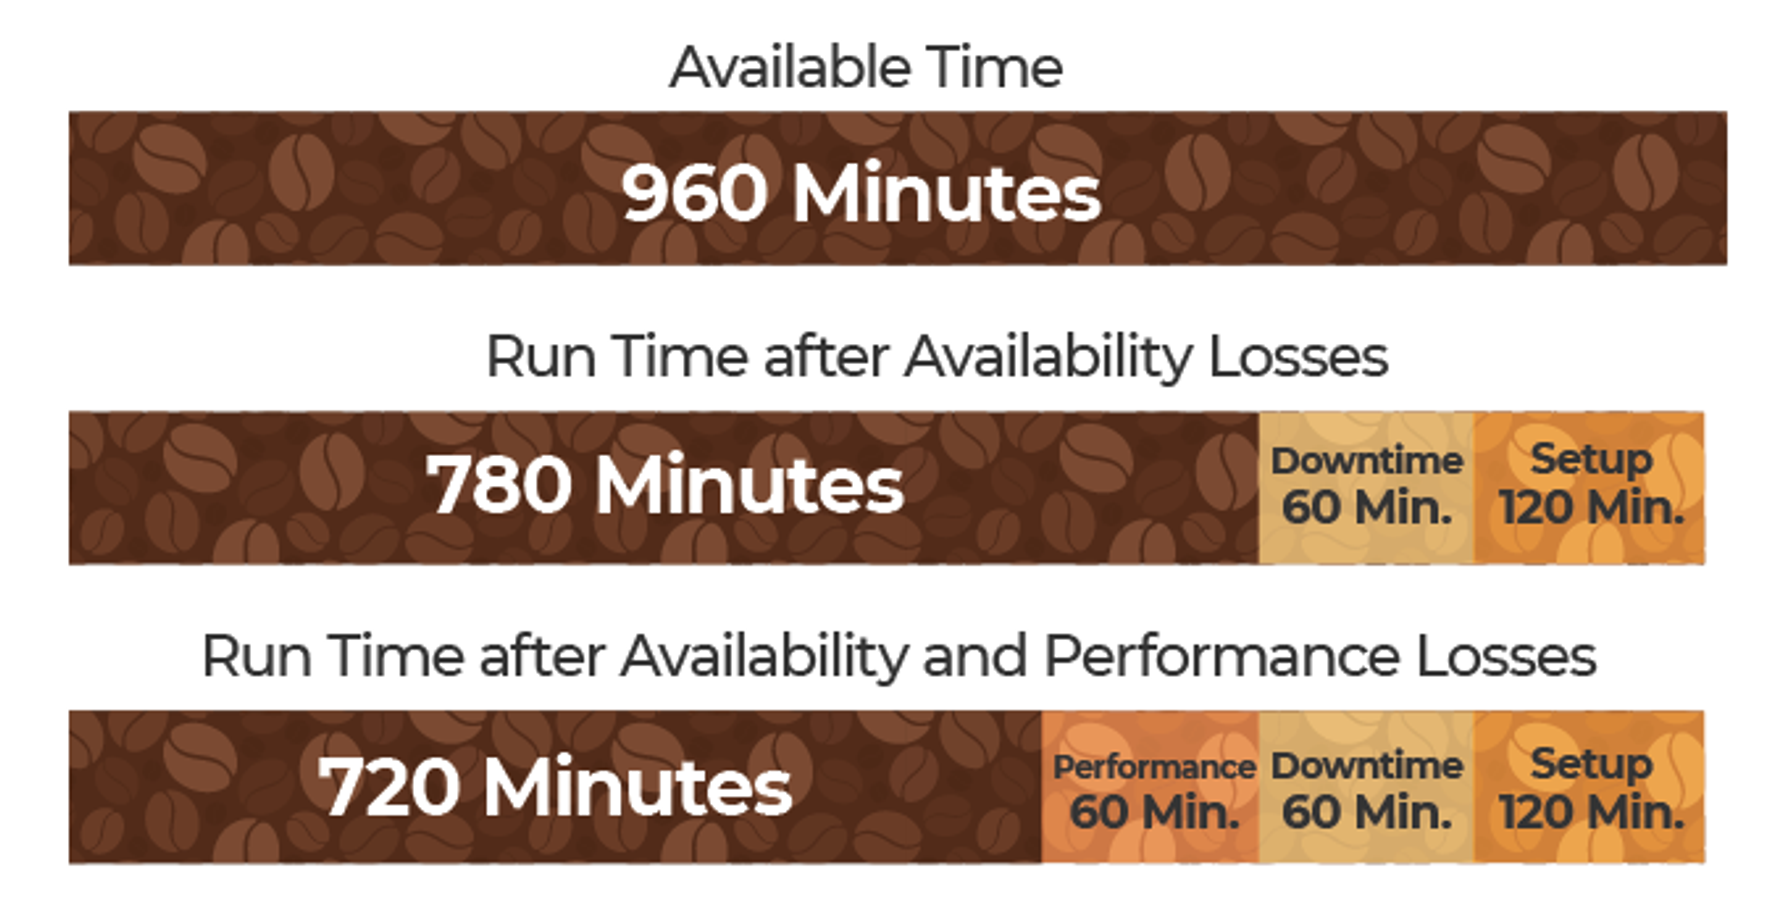 Run Time after Availability and Performance Losses: 720 Minutes